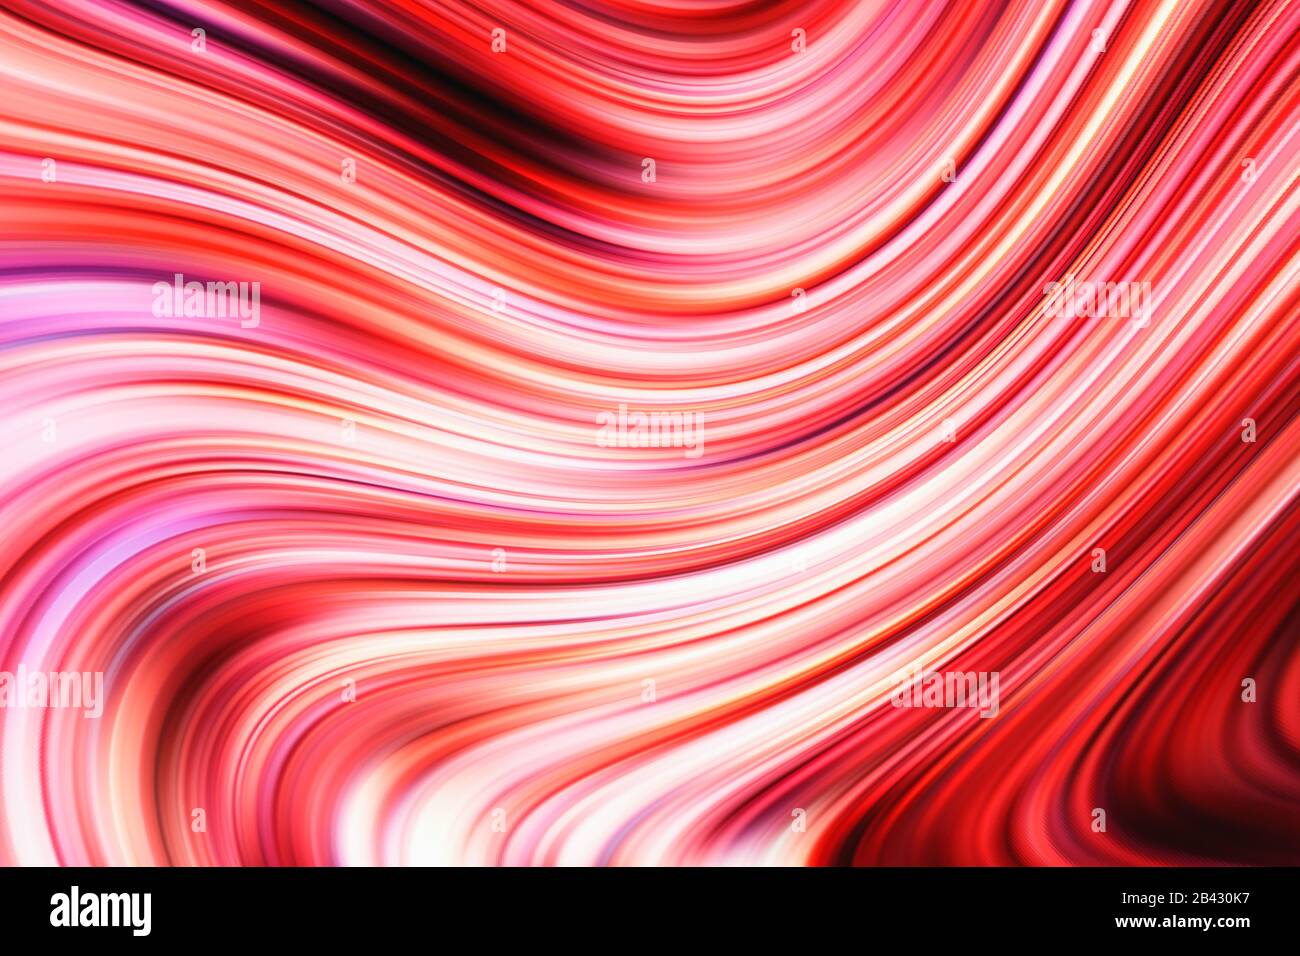 Colorful red pink abstract light effect illustration texture wallpaper 3D  rendering. Vibrant Color wavy striped pattern for design and background  Stock Photo - Alamy